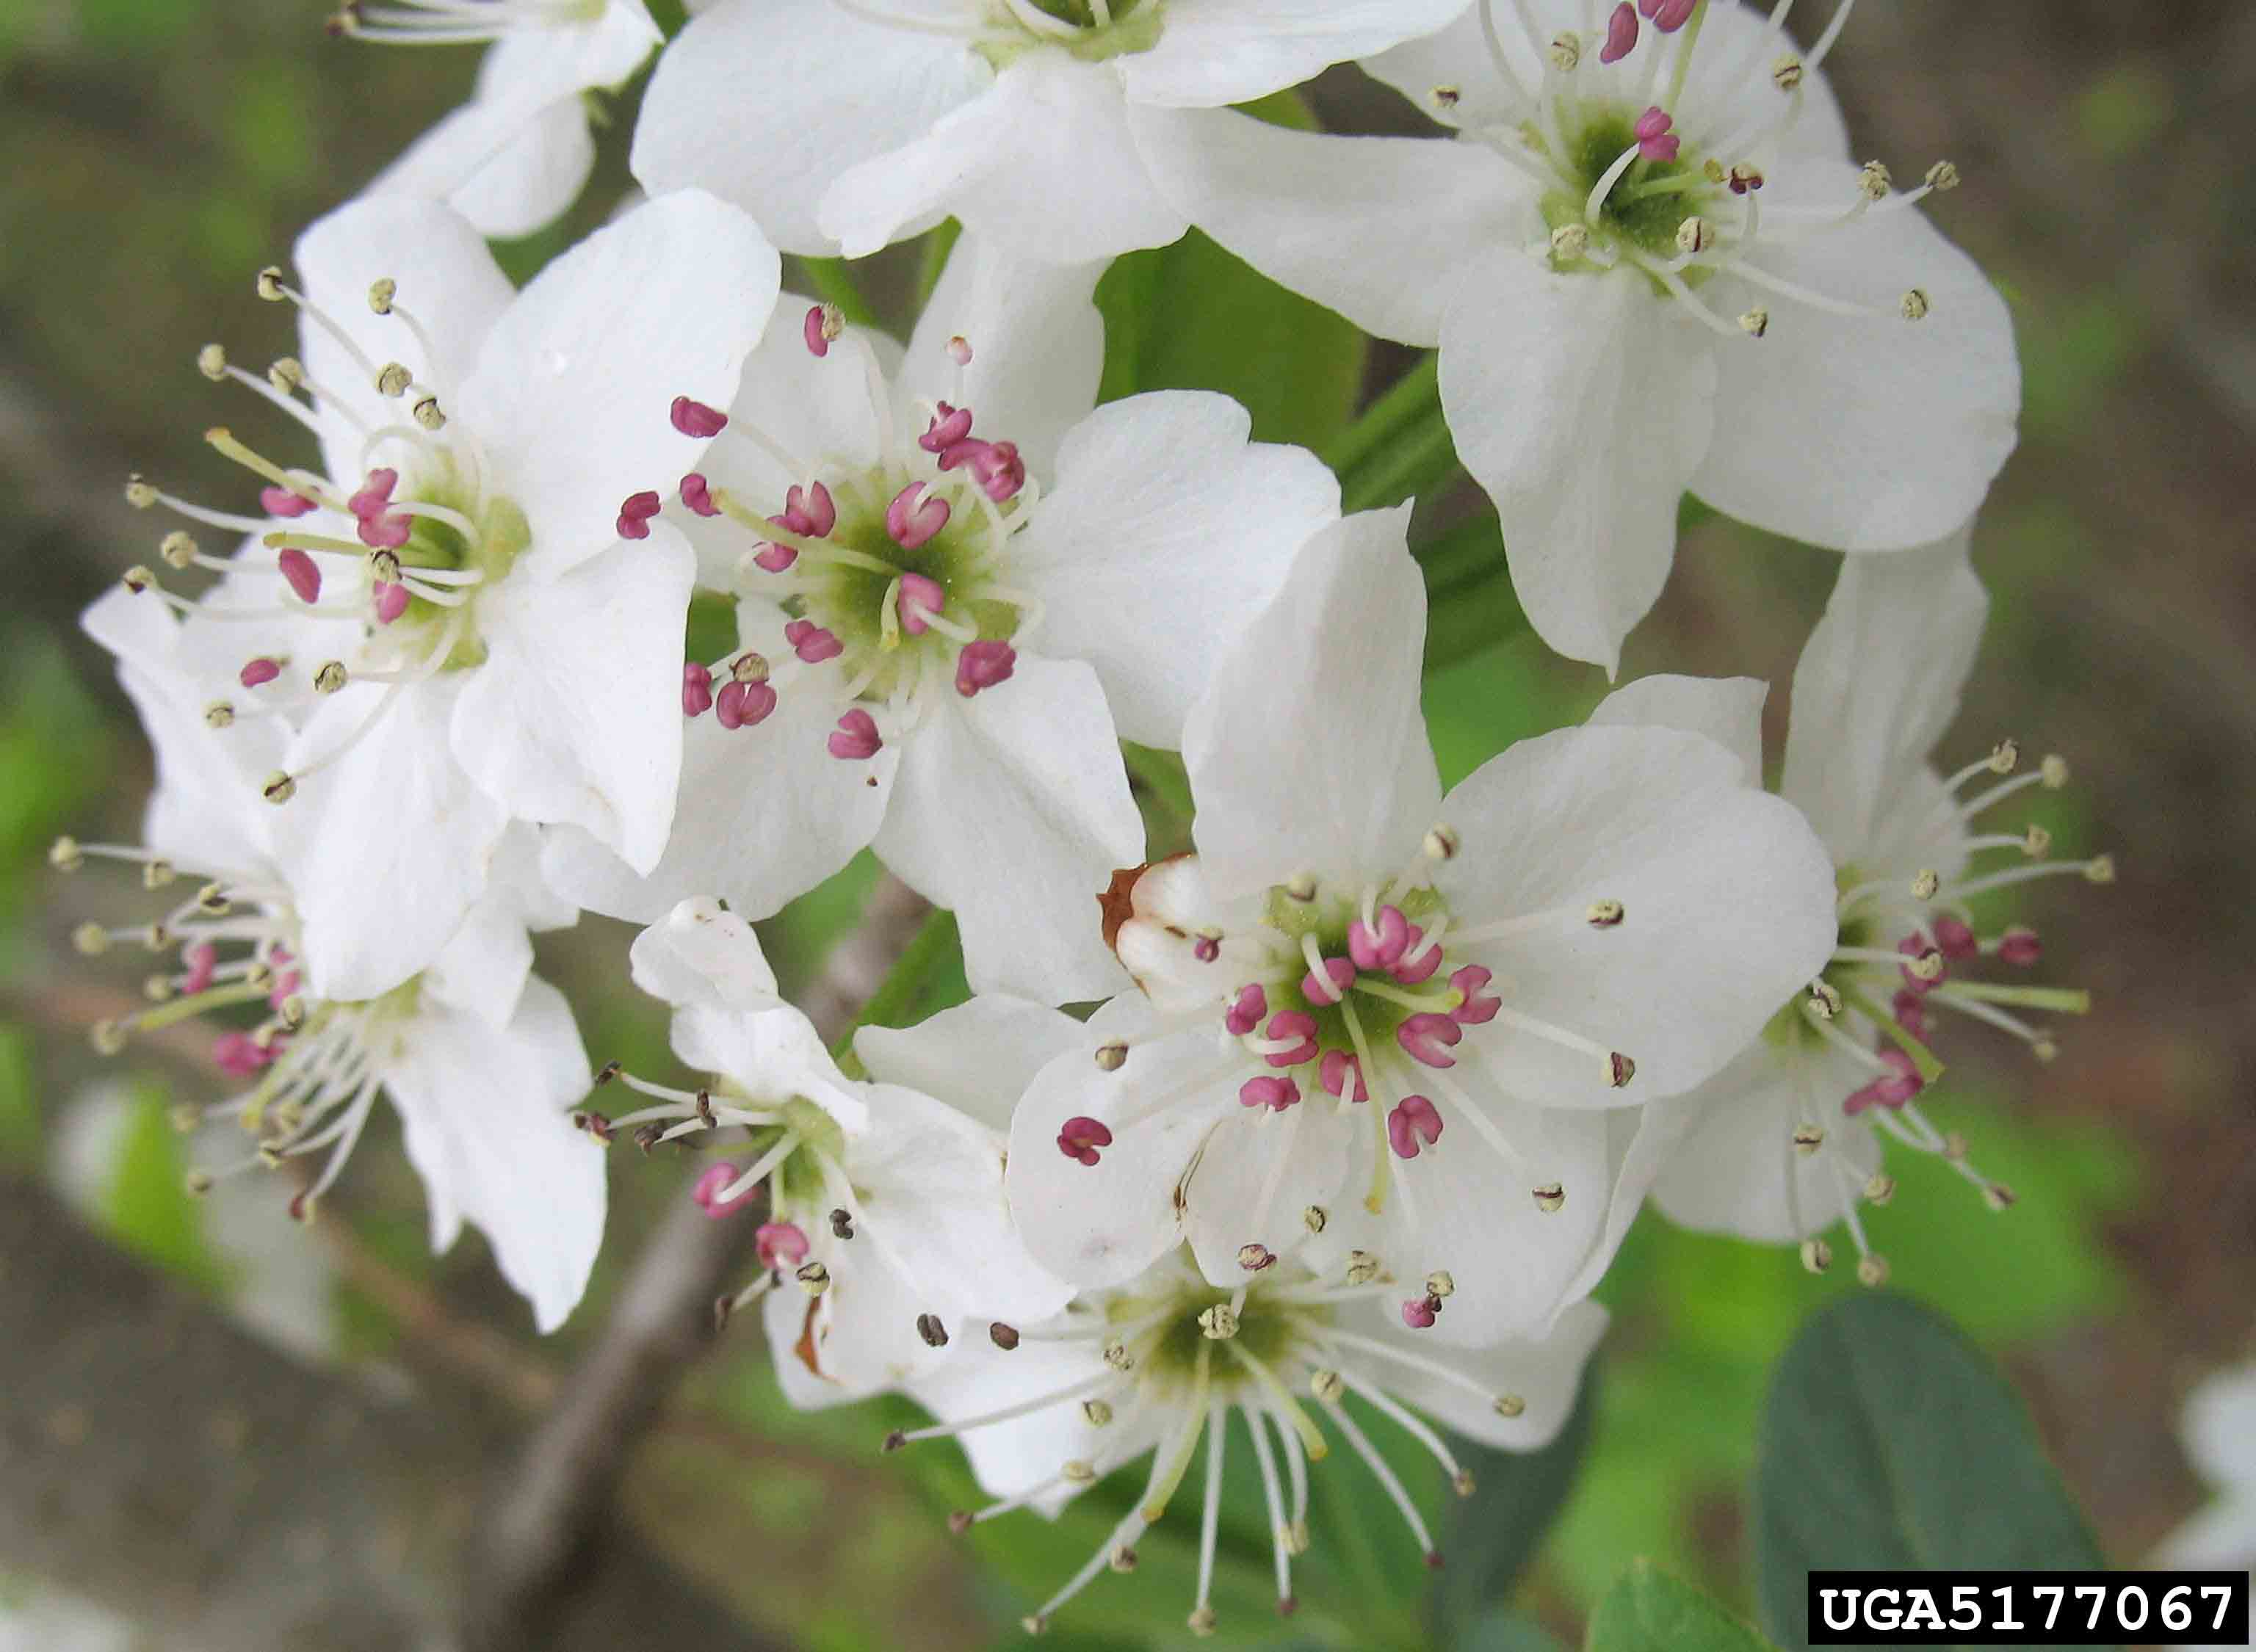 Southern crabapple flowers, white variety